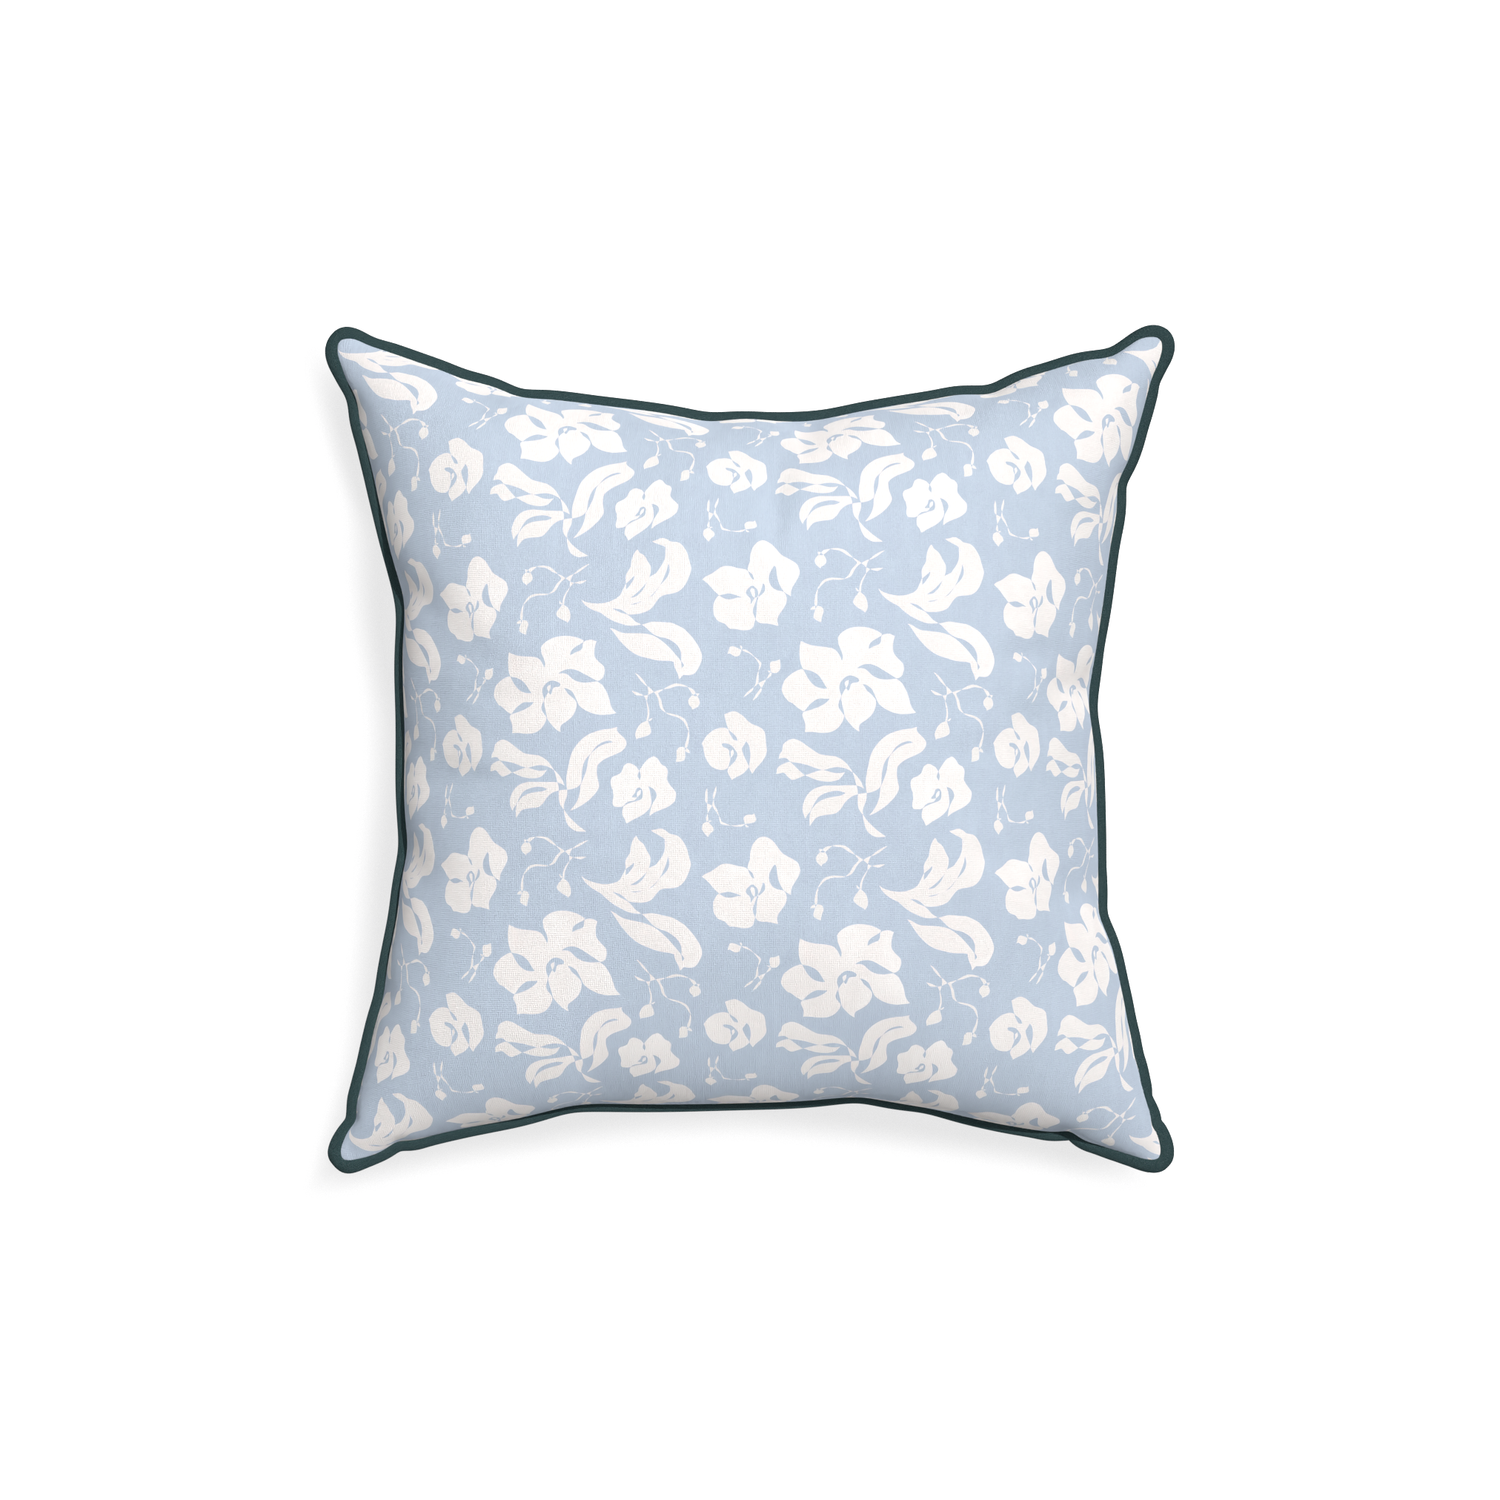 18-square georgia custom cornflower blue floralpillow with p piping on white background